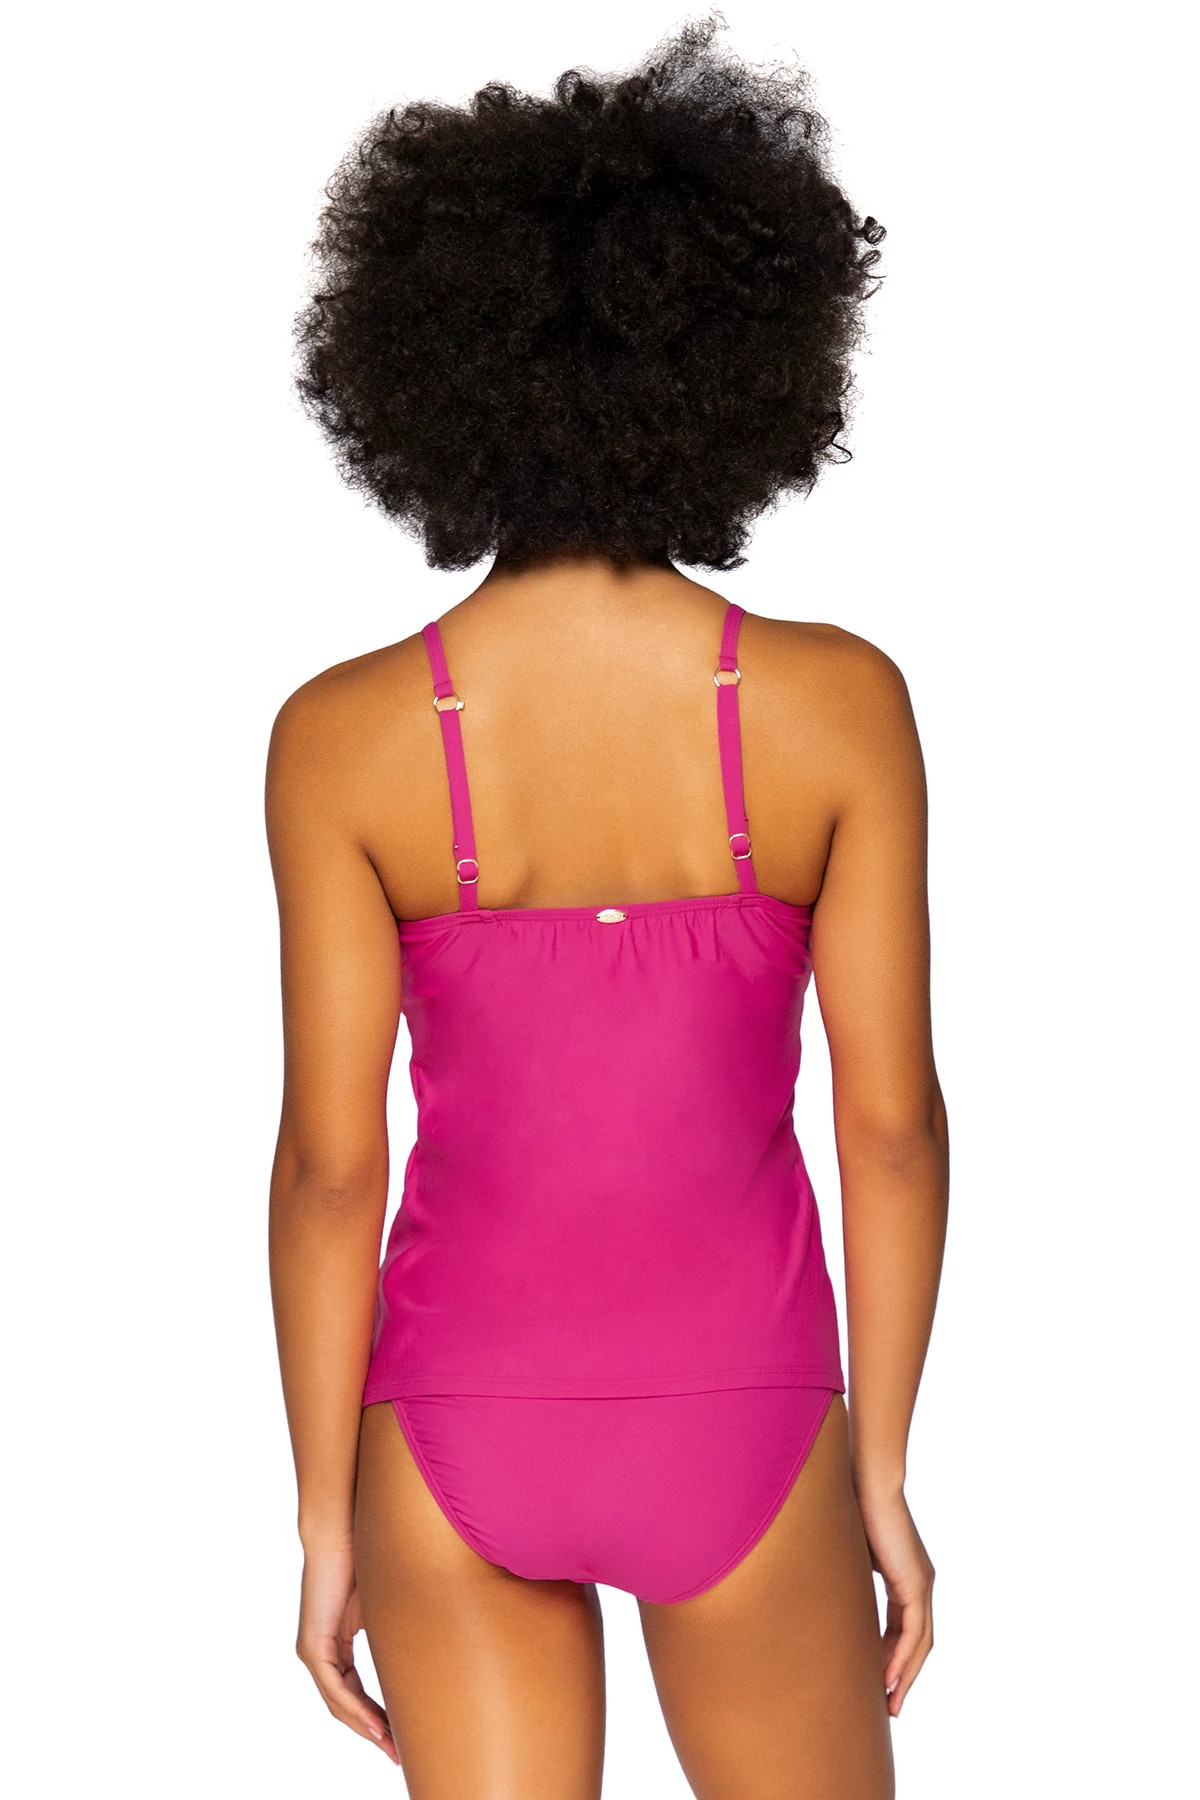 PITAYA Crossroads Over The Shoulder Tankini Top (D+ Cup) image number 2